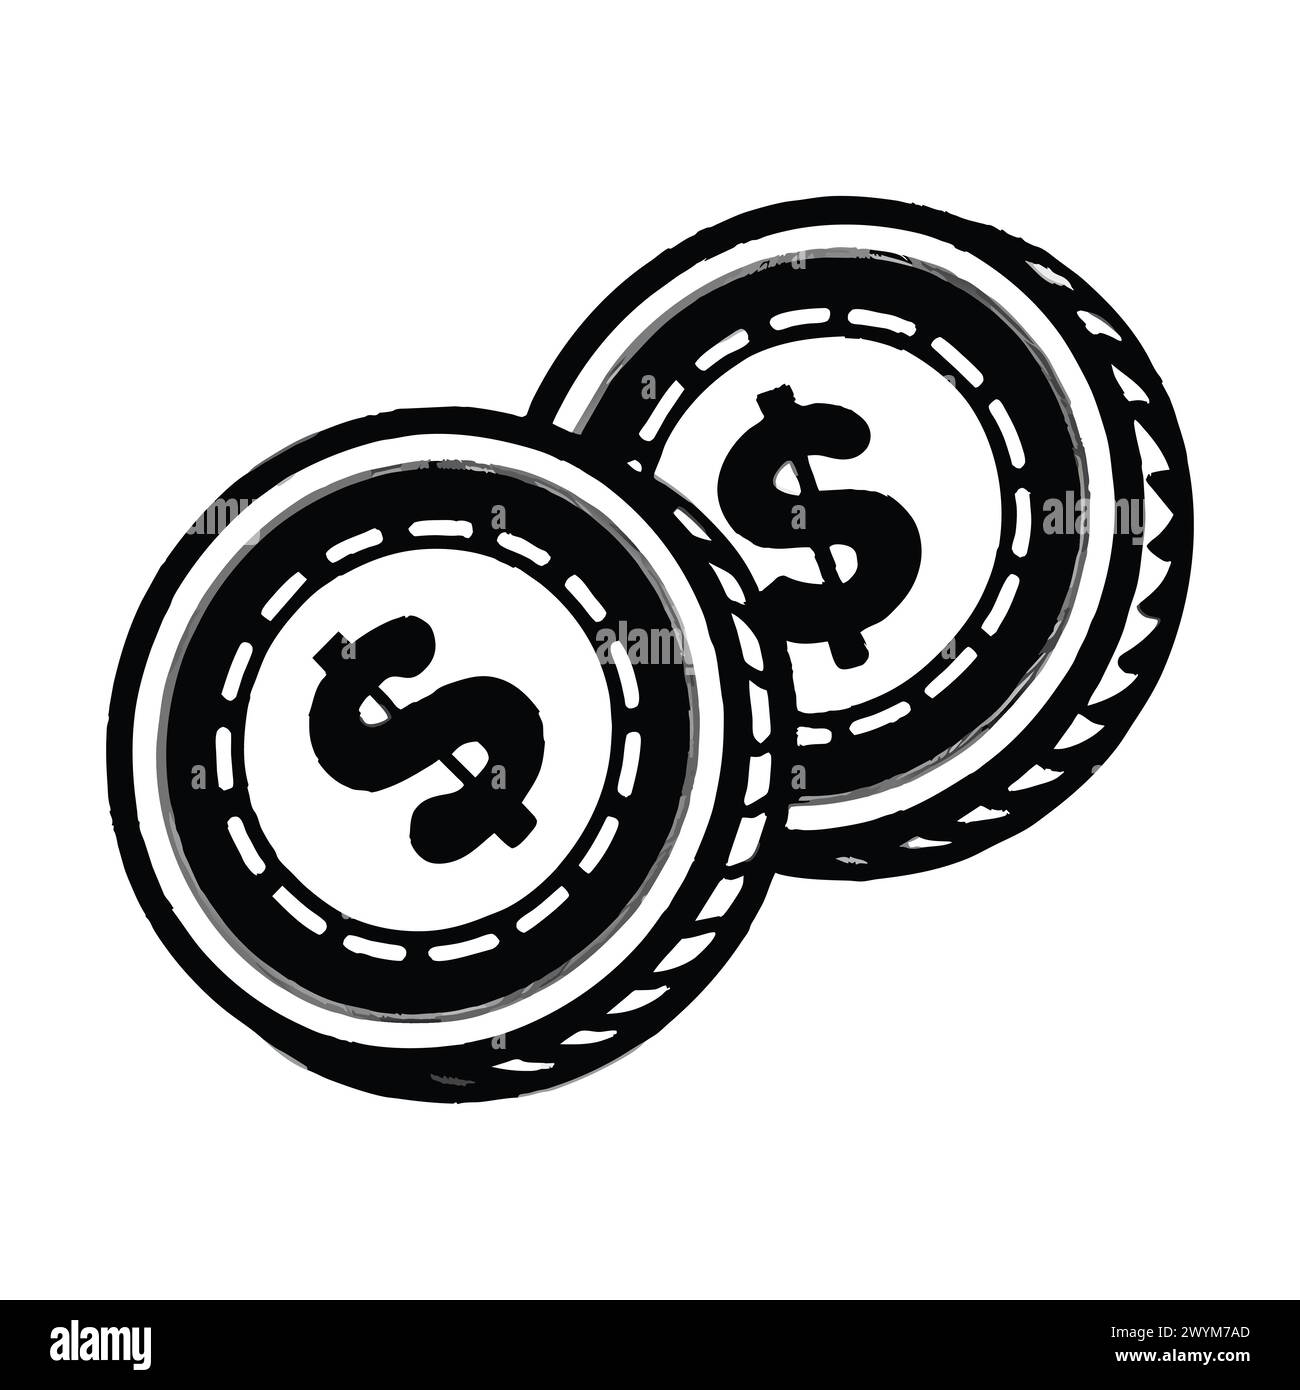 Dollar sign 3 coins on white background Stock Vector